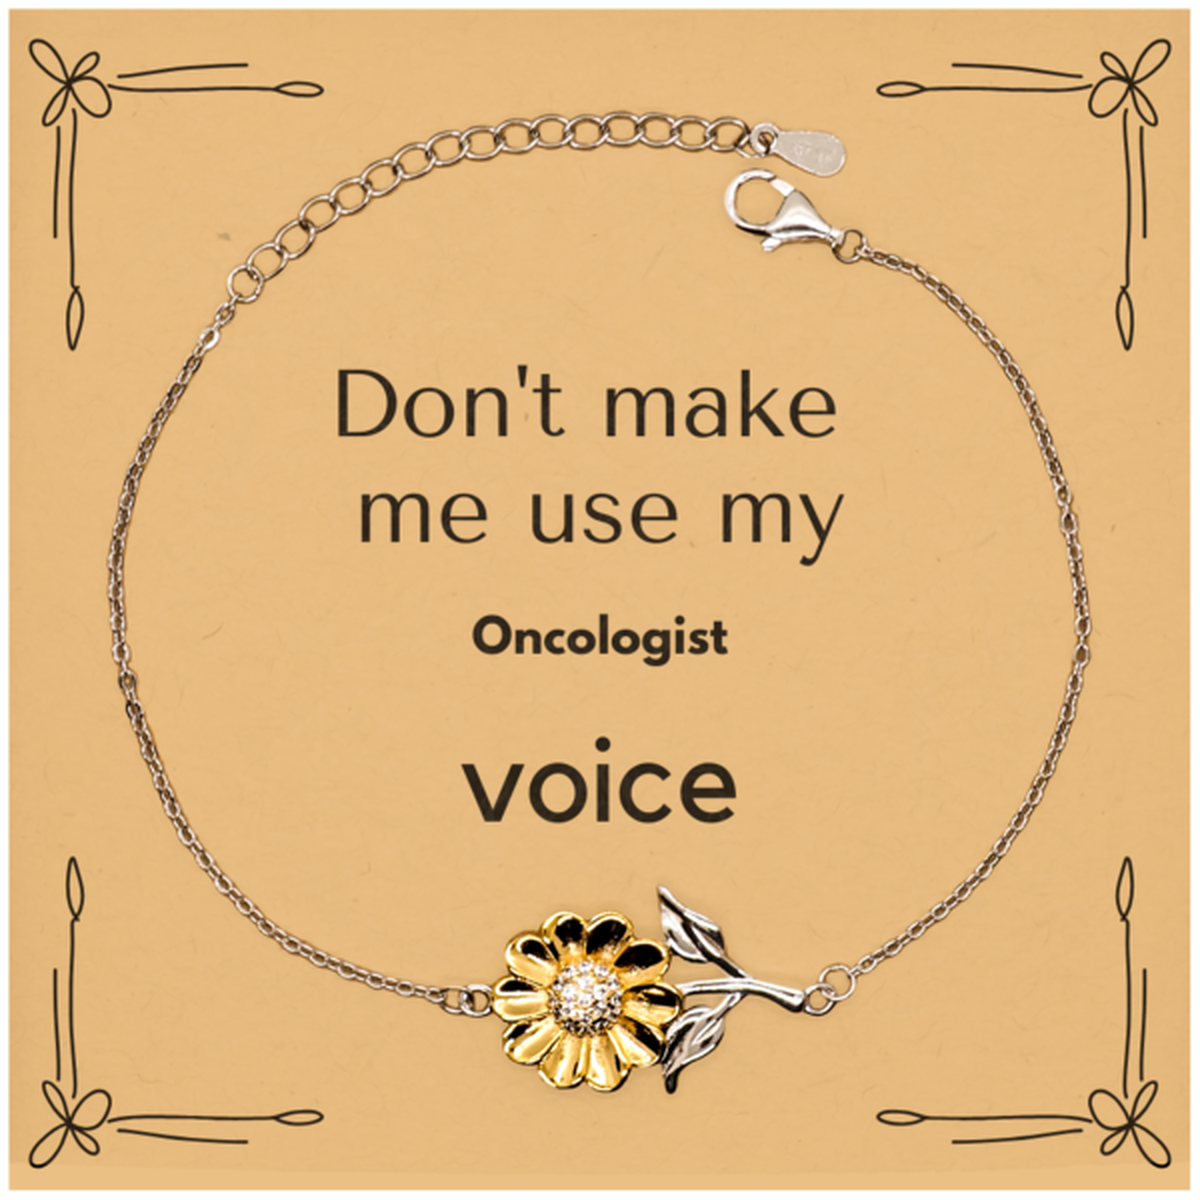 Don't make me use my Oncologist voice, Sarcasm Oncologist Card Gifts, Christmas Oncologist Sunflower Bracelet Birthday Unique Gifts For Oncologist Coworkers, Men, Women, Colleague, Friends